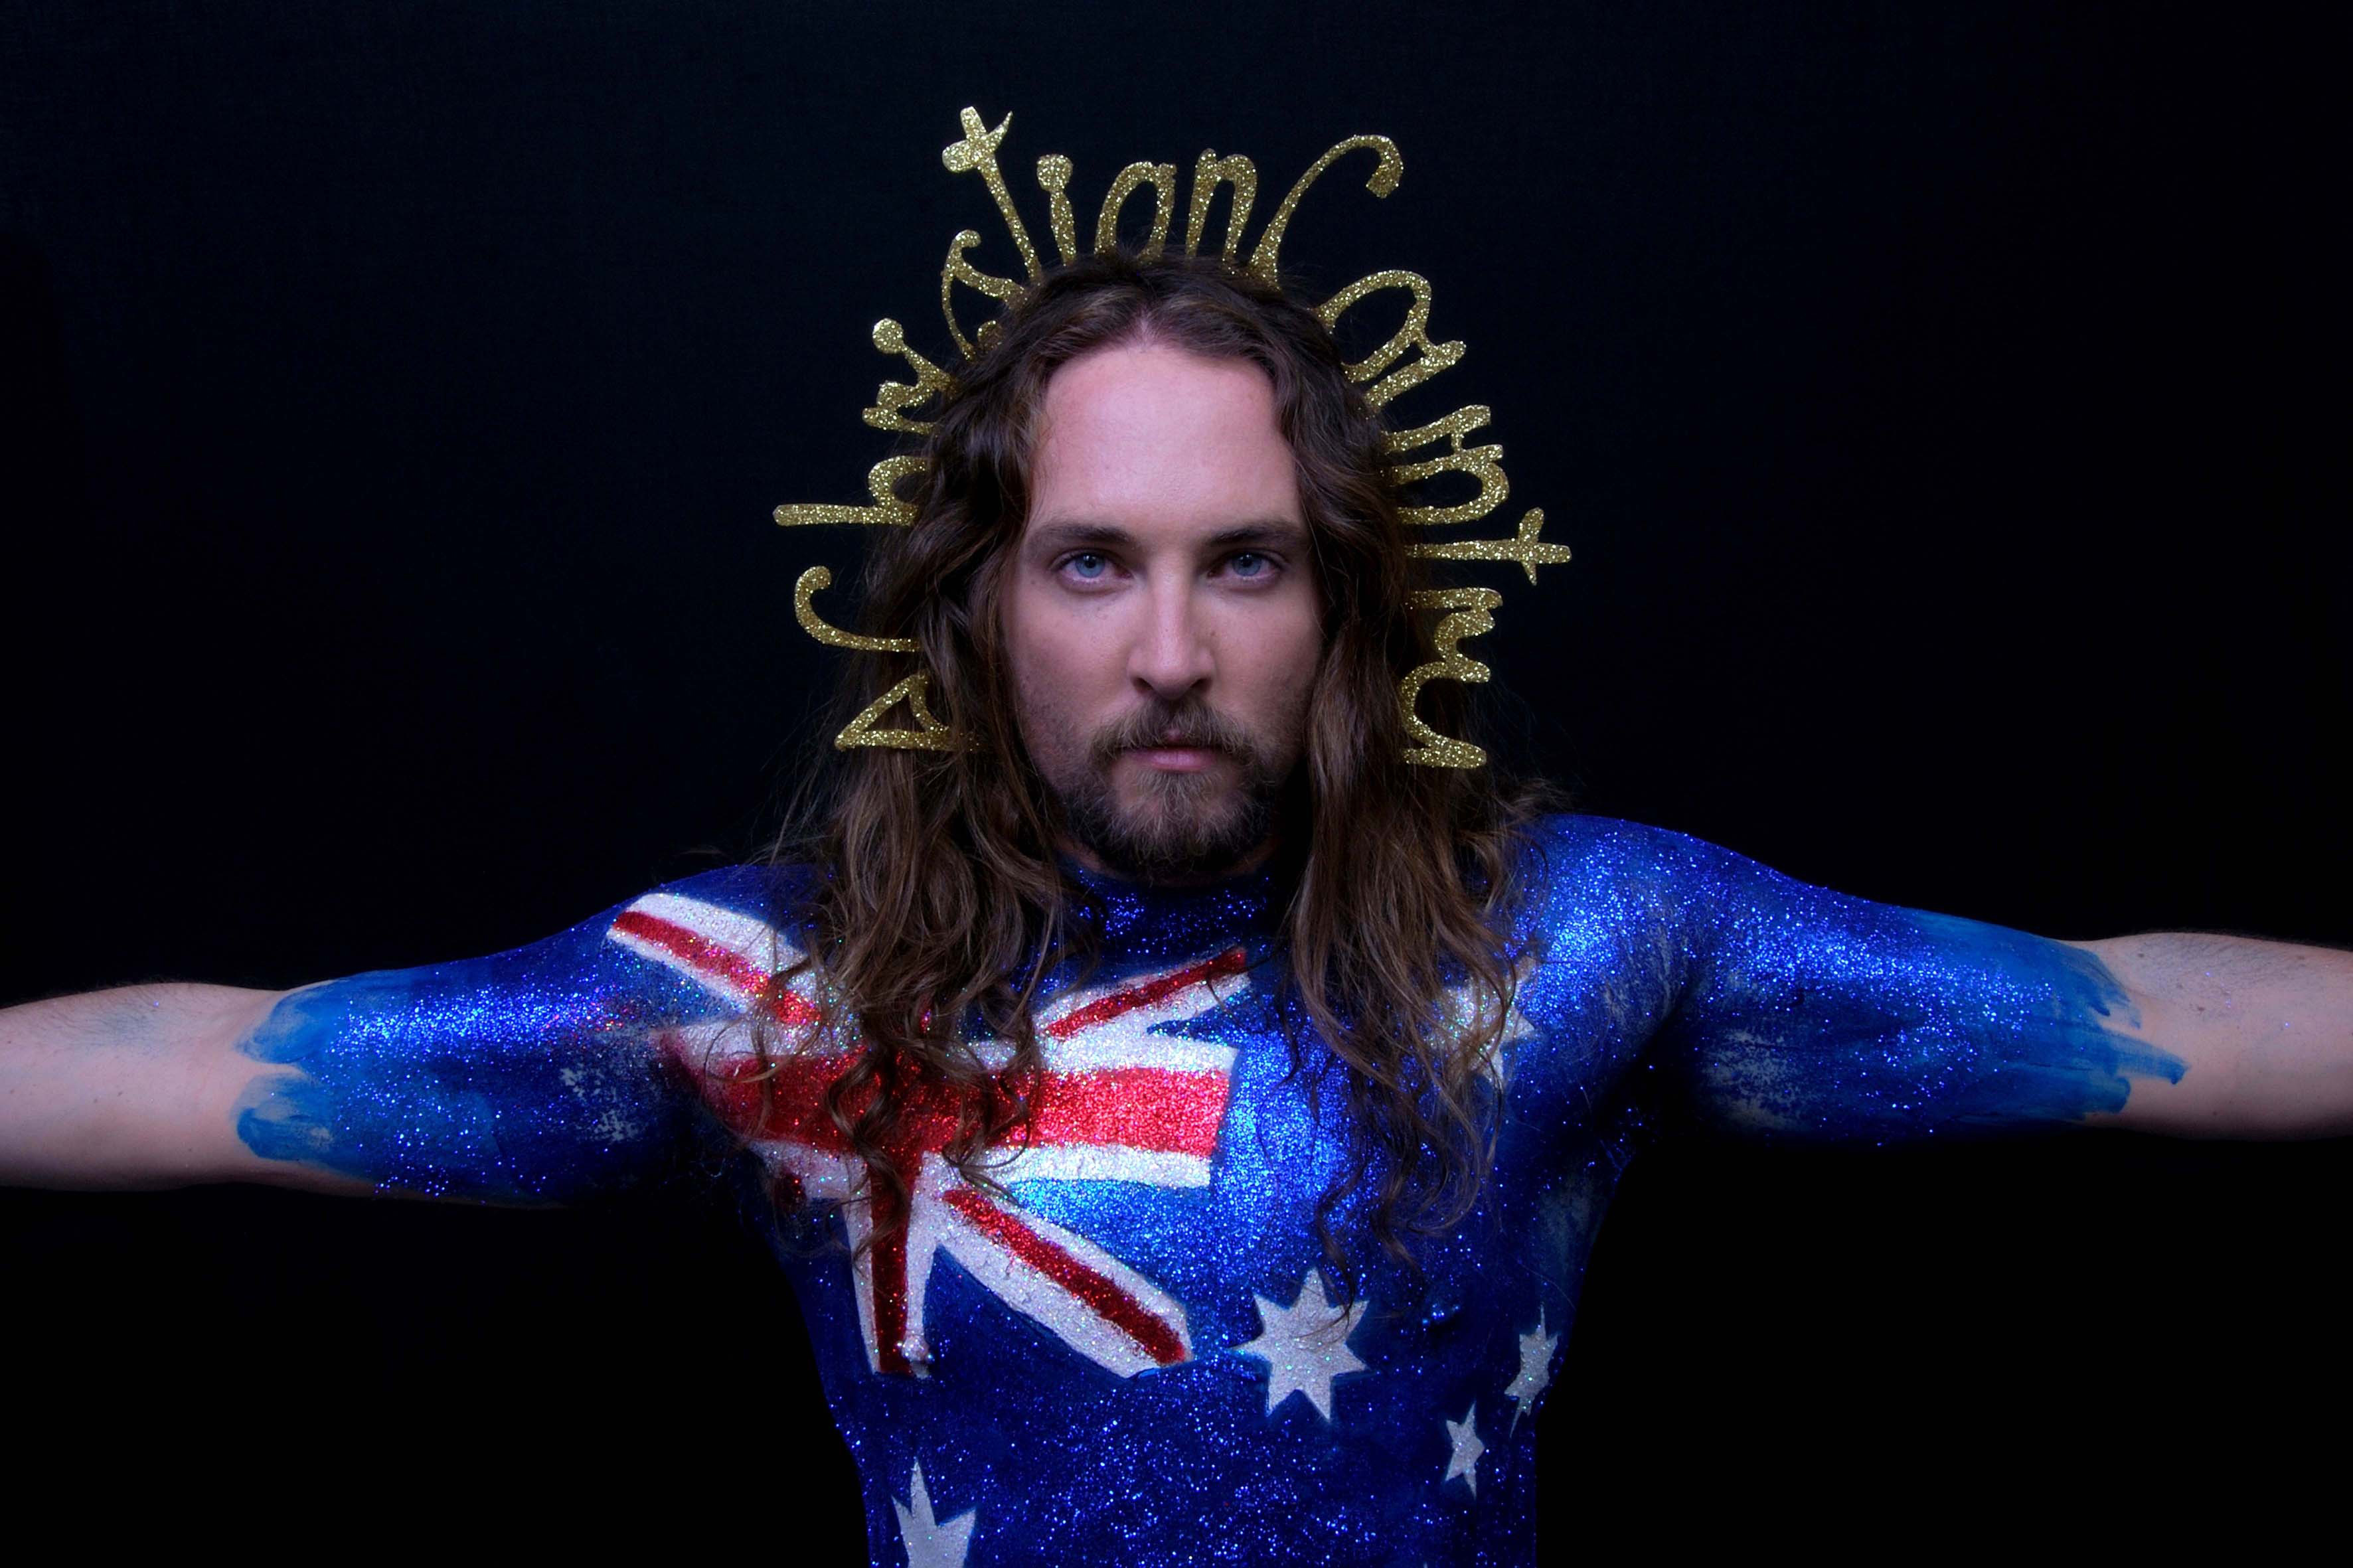 Photographic self-portrait by artist Liam Benson showing the artist's upper body with outstretched arms covered in glitter in the design of the Australian flag, wearing a gold crown of looping letters that spell "A Christian Country".